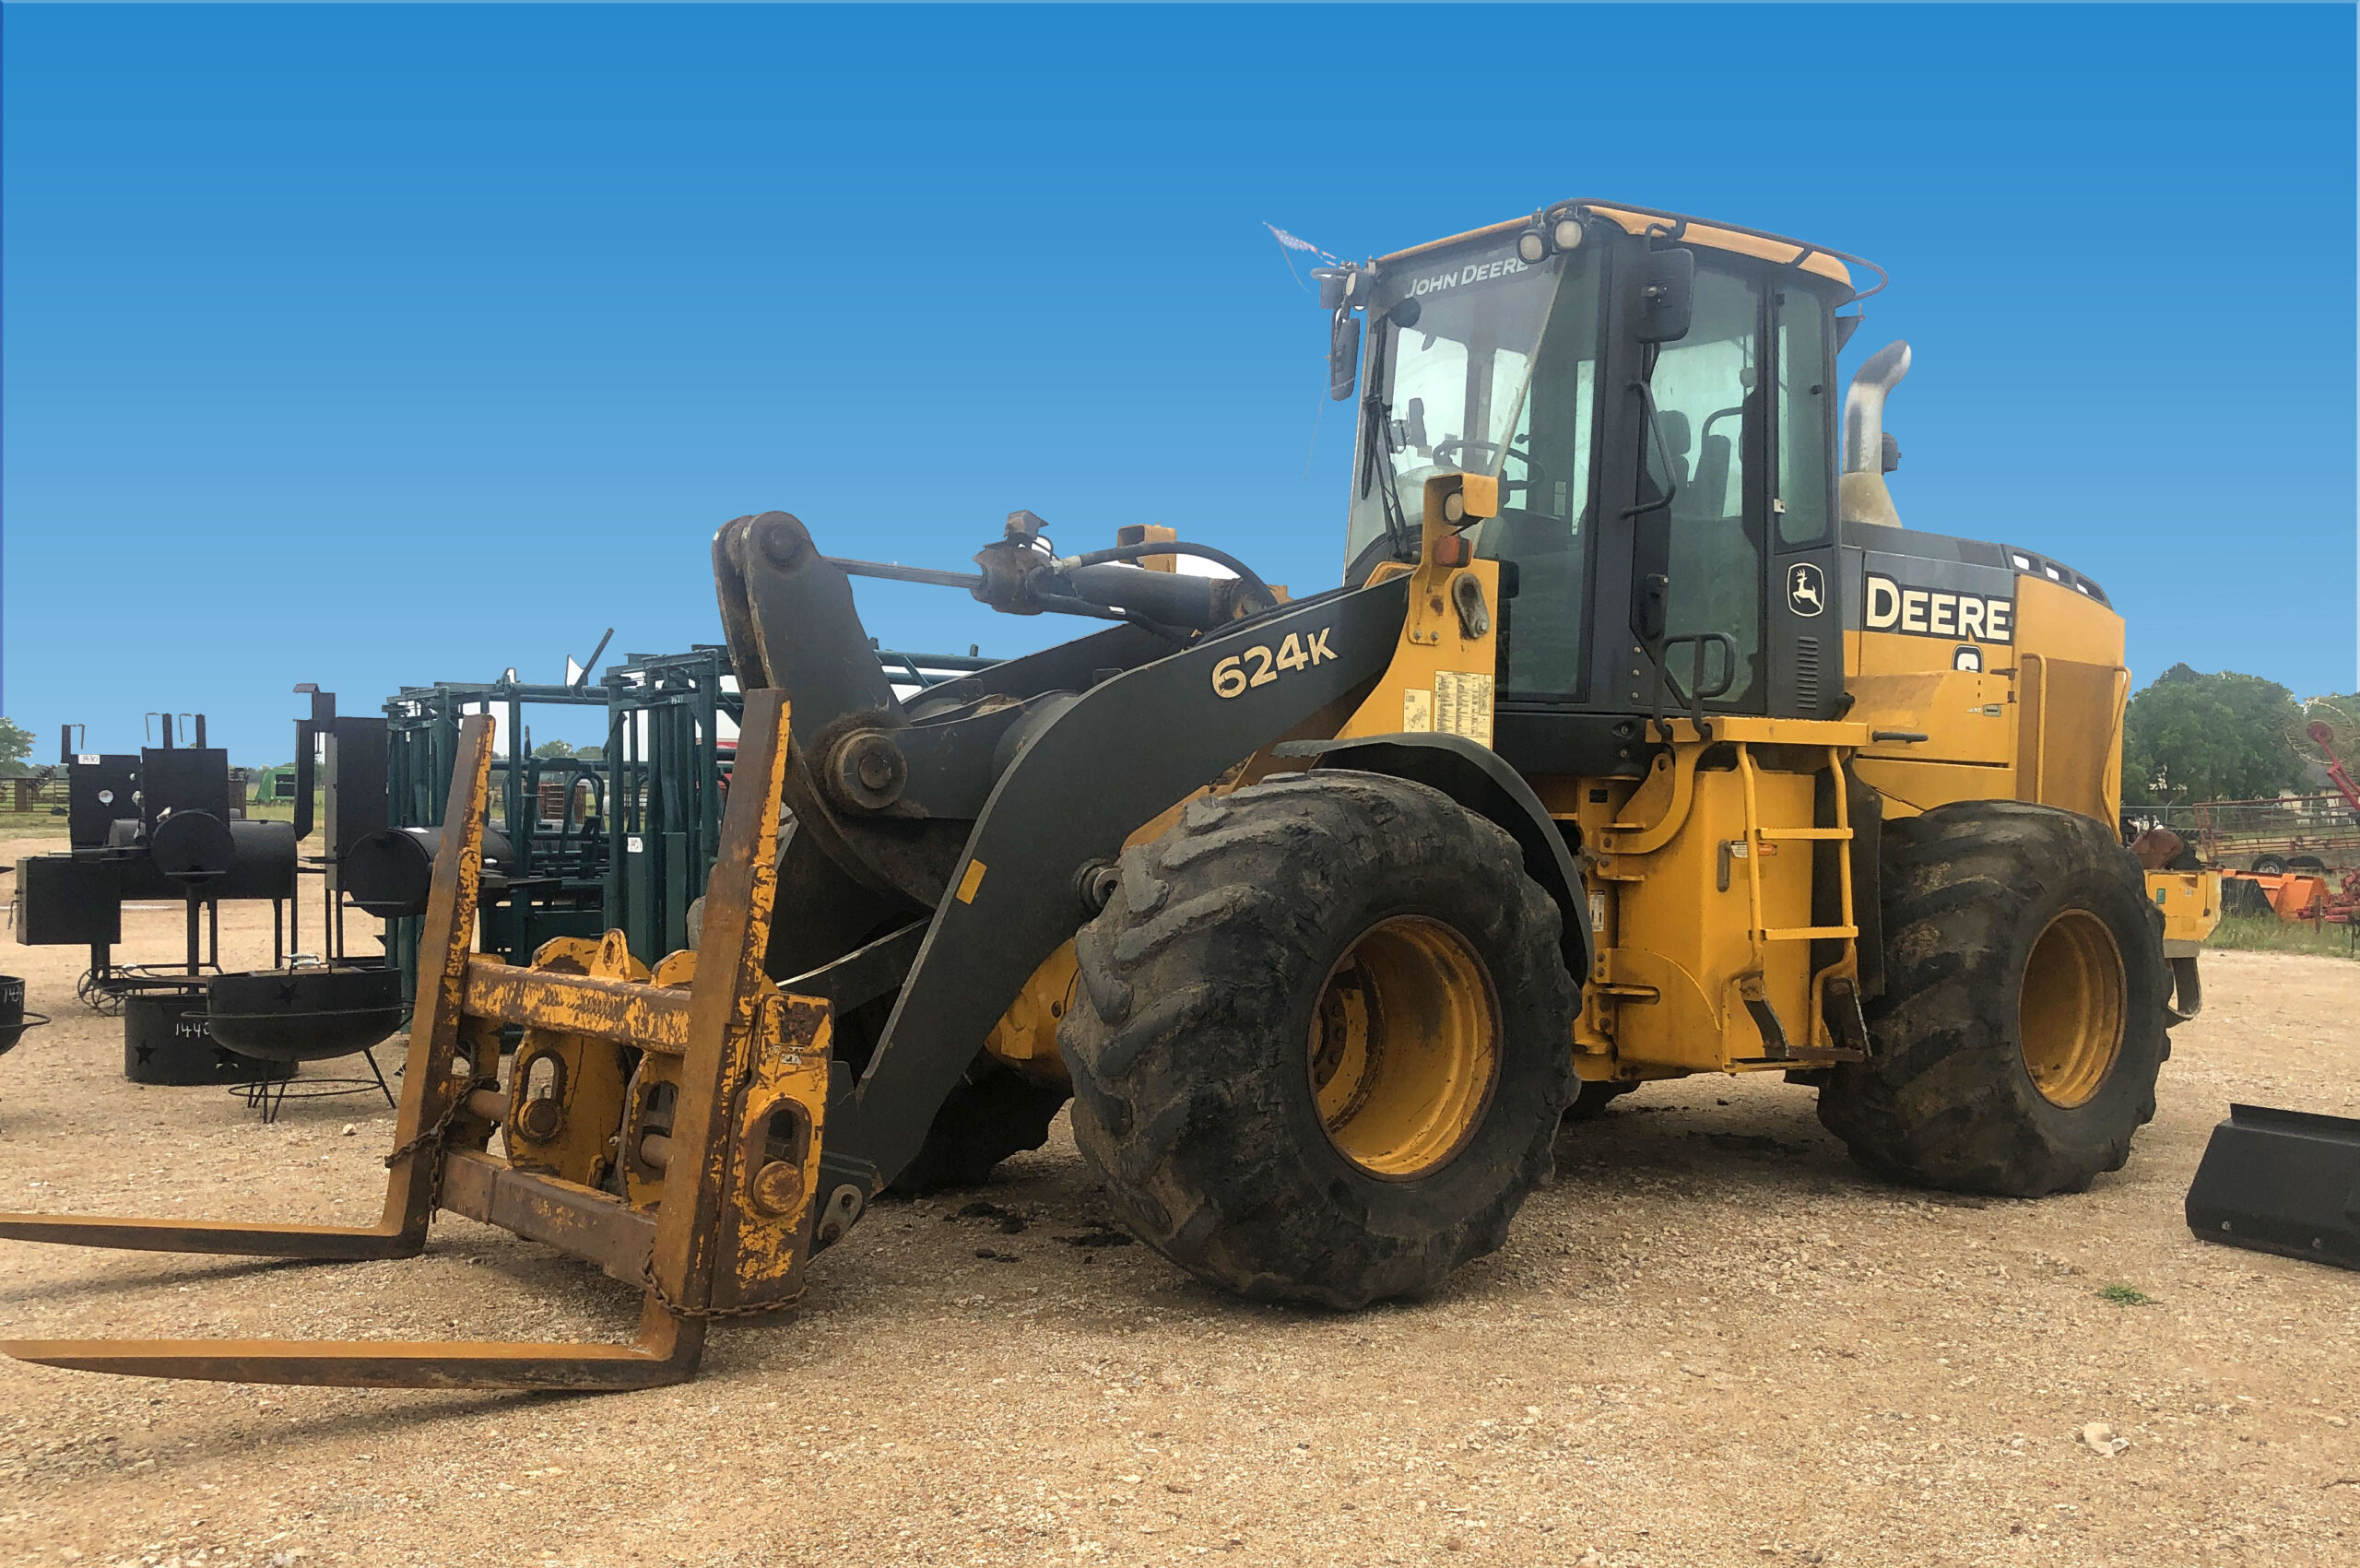 Wheel Loader for sale at auction. Farm Ranch and Constructoin Equipment Acution